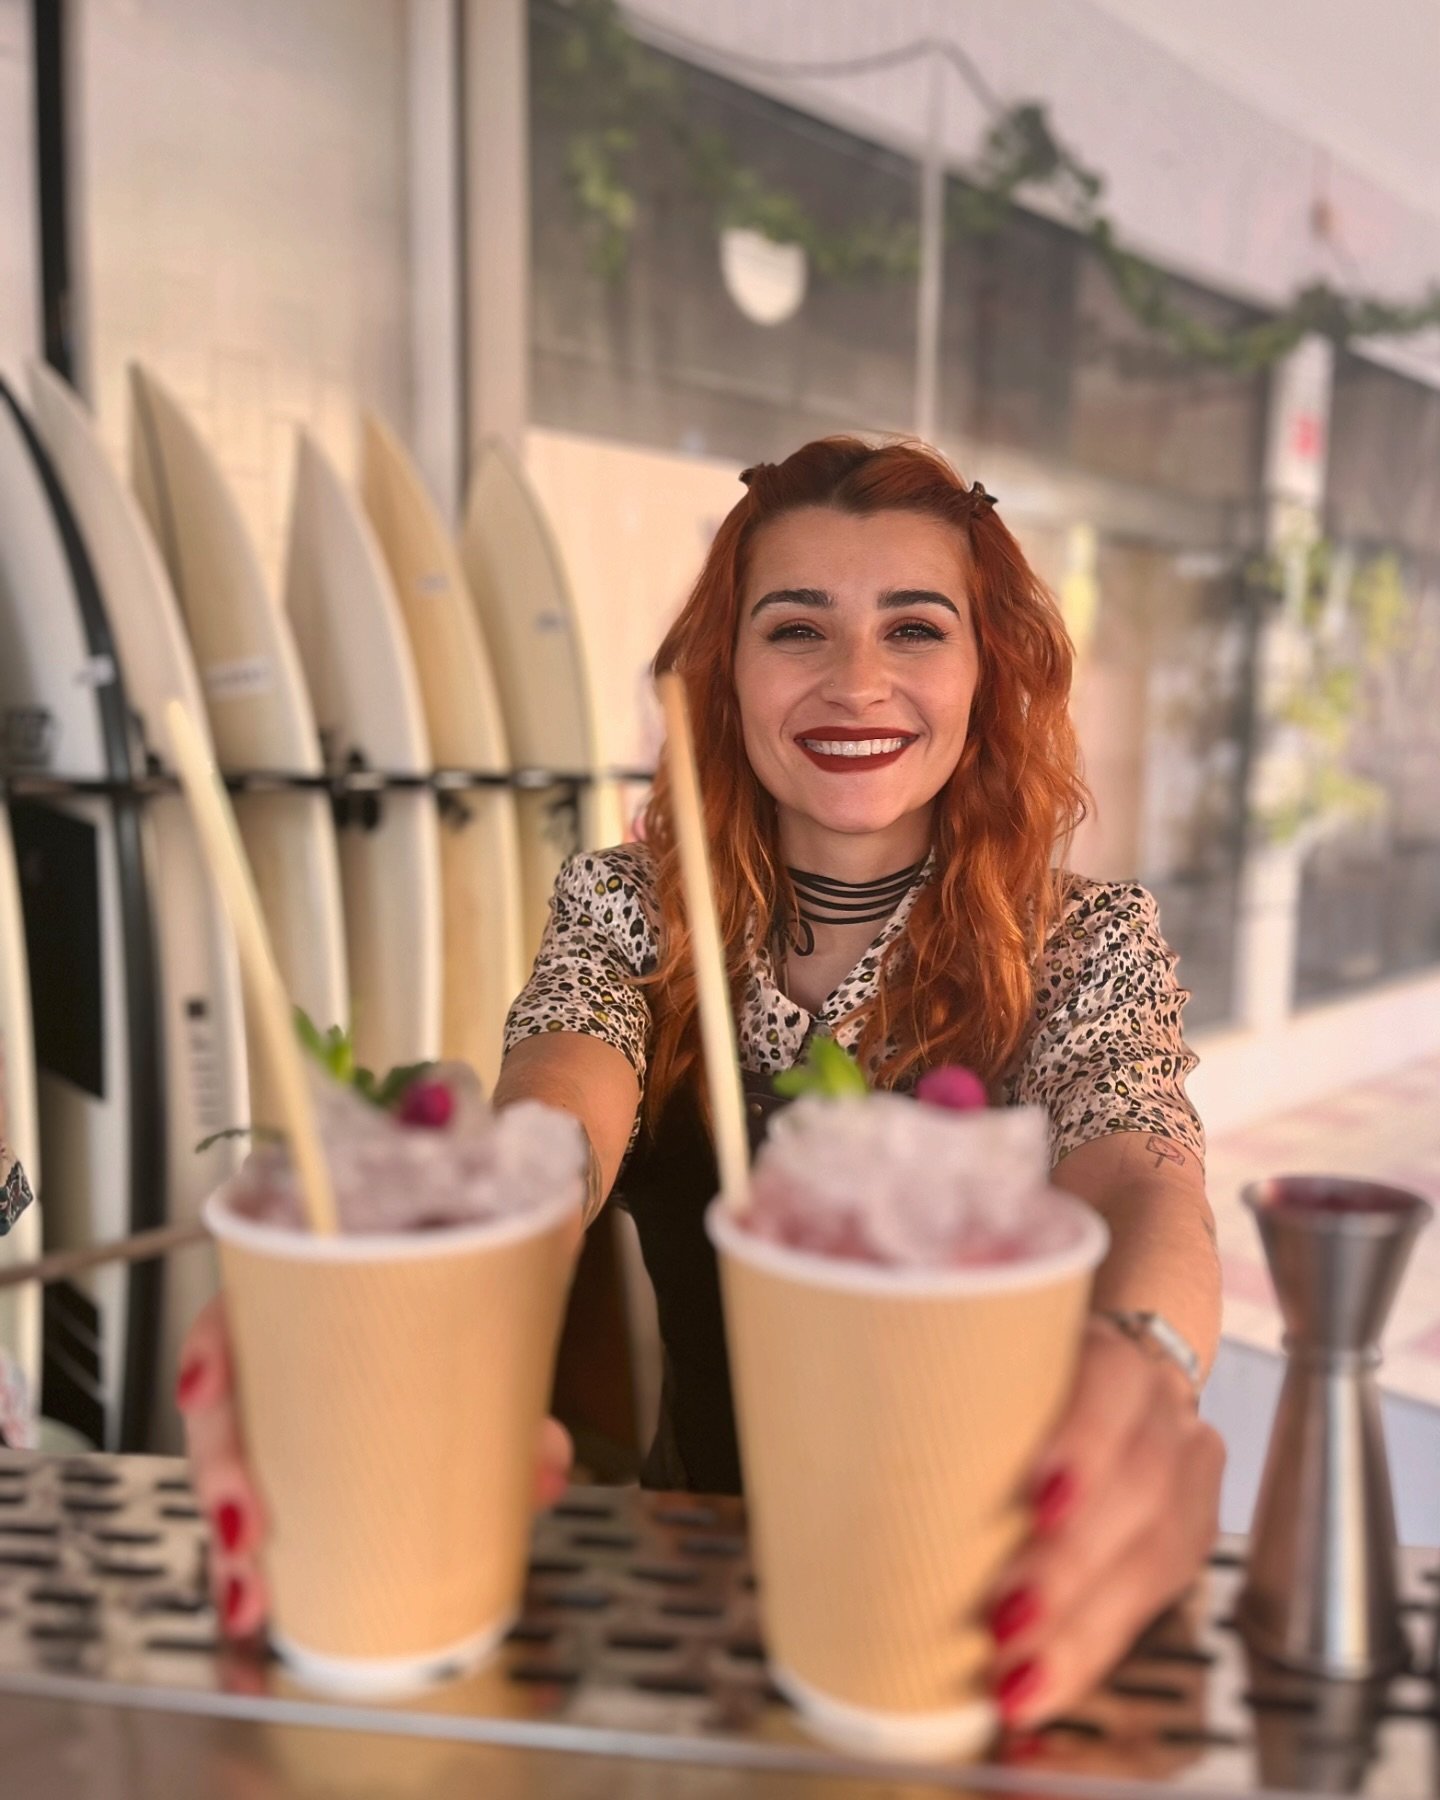 Surfboards and cocktails: The ultimate beach duo! 🏄&zwj;♀️🍸
.
.
.
.